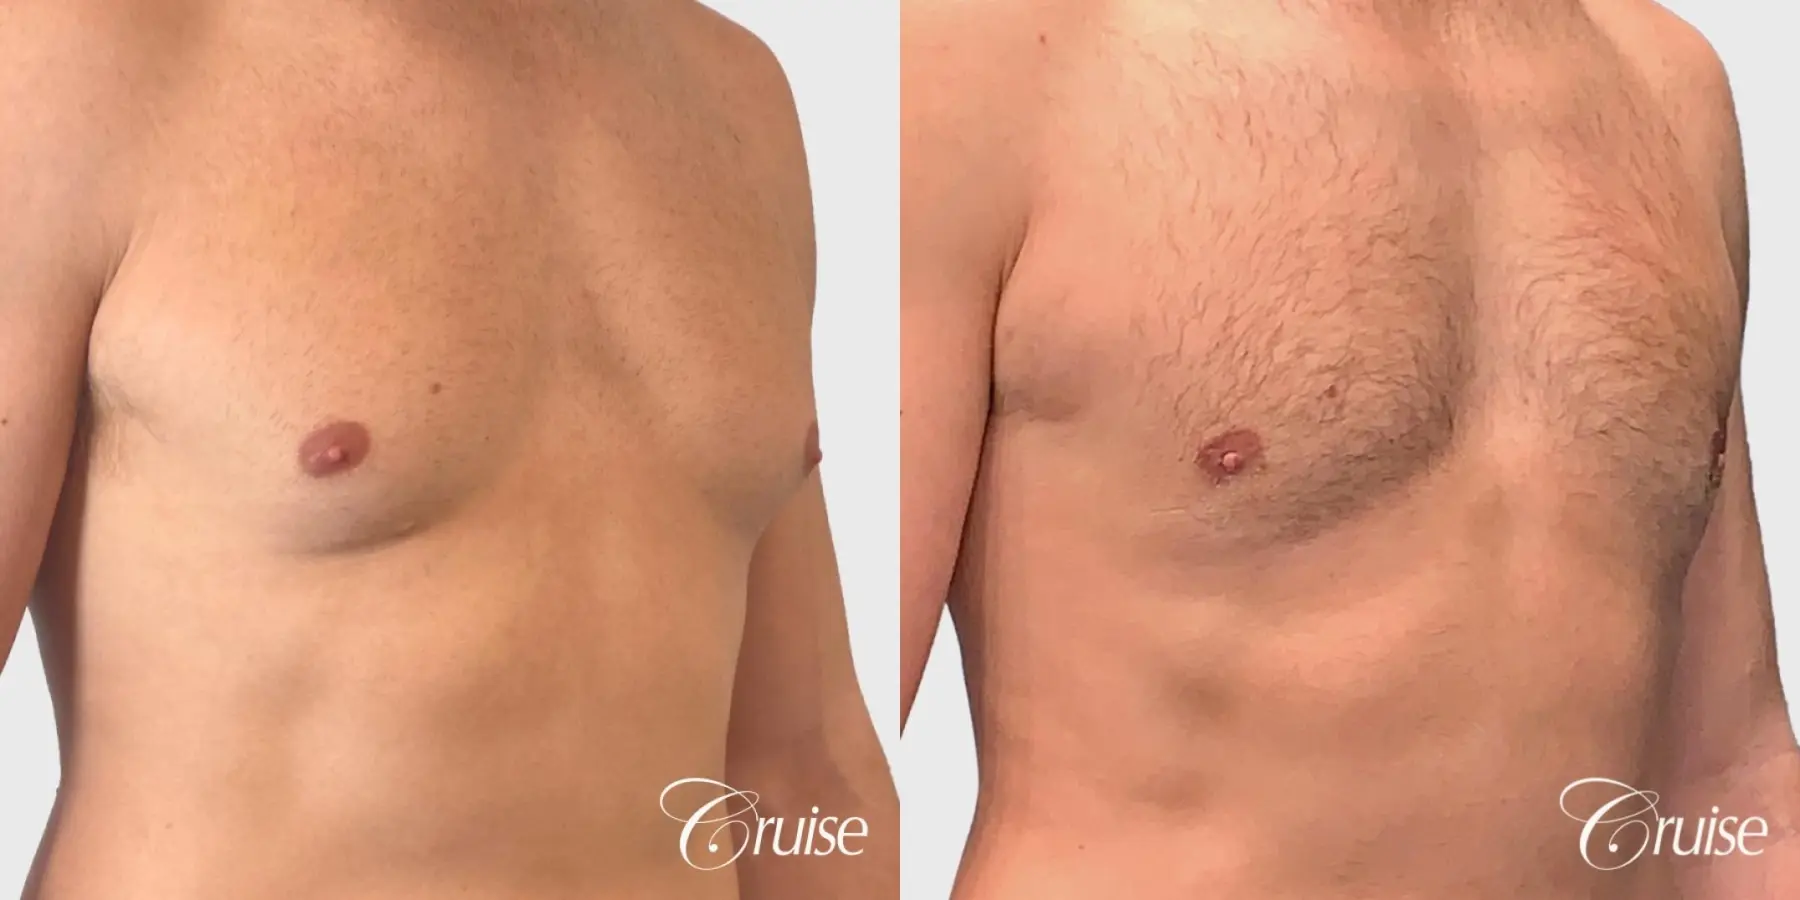 Gynecomastia Removal - Before and After 2